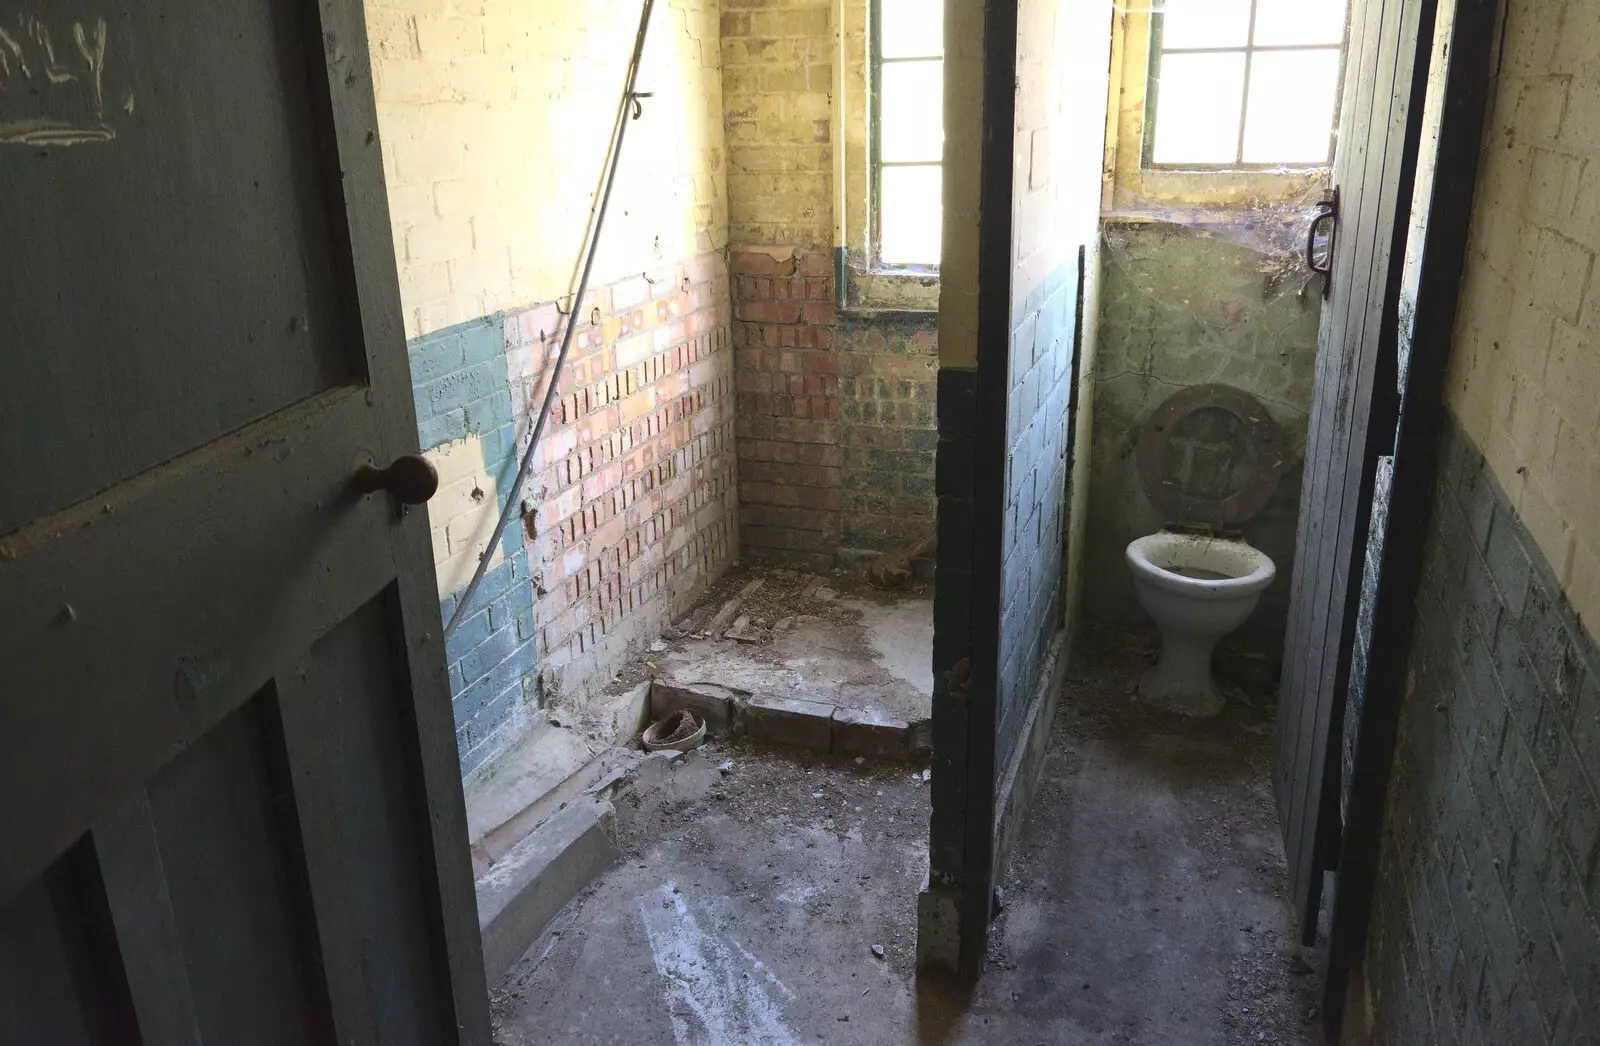 A shower and toilet , from A 1940s Timewarp, Site 4, Bungay Airfield, Flixton, Suffolk - 9th June 2022